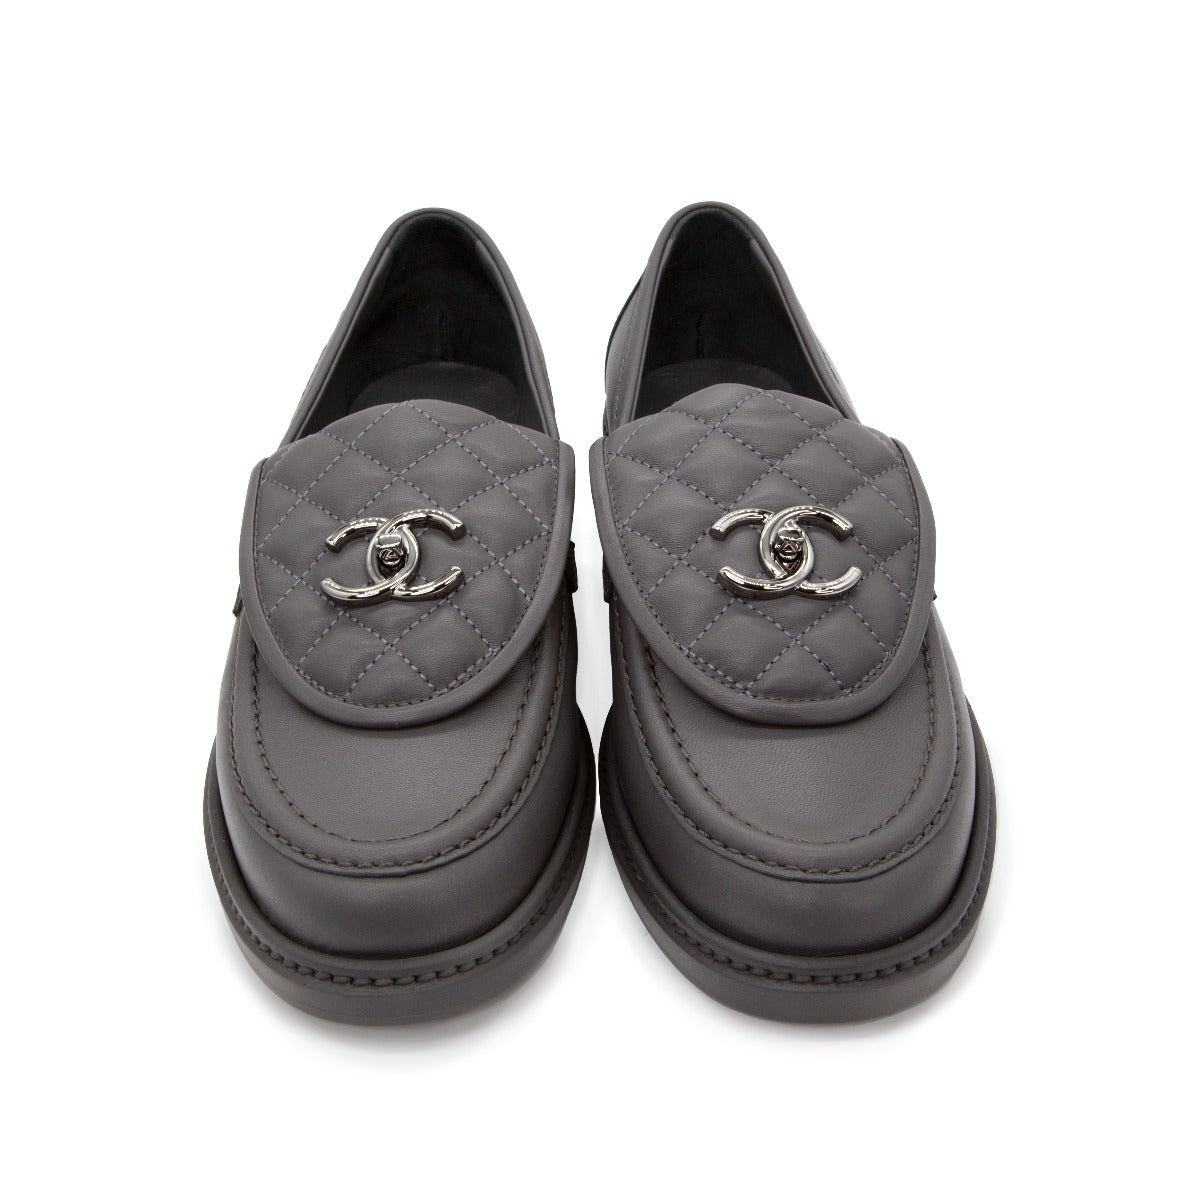 CC Quilted Leather Loafers - Rewind Vintage Affairs